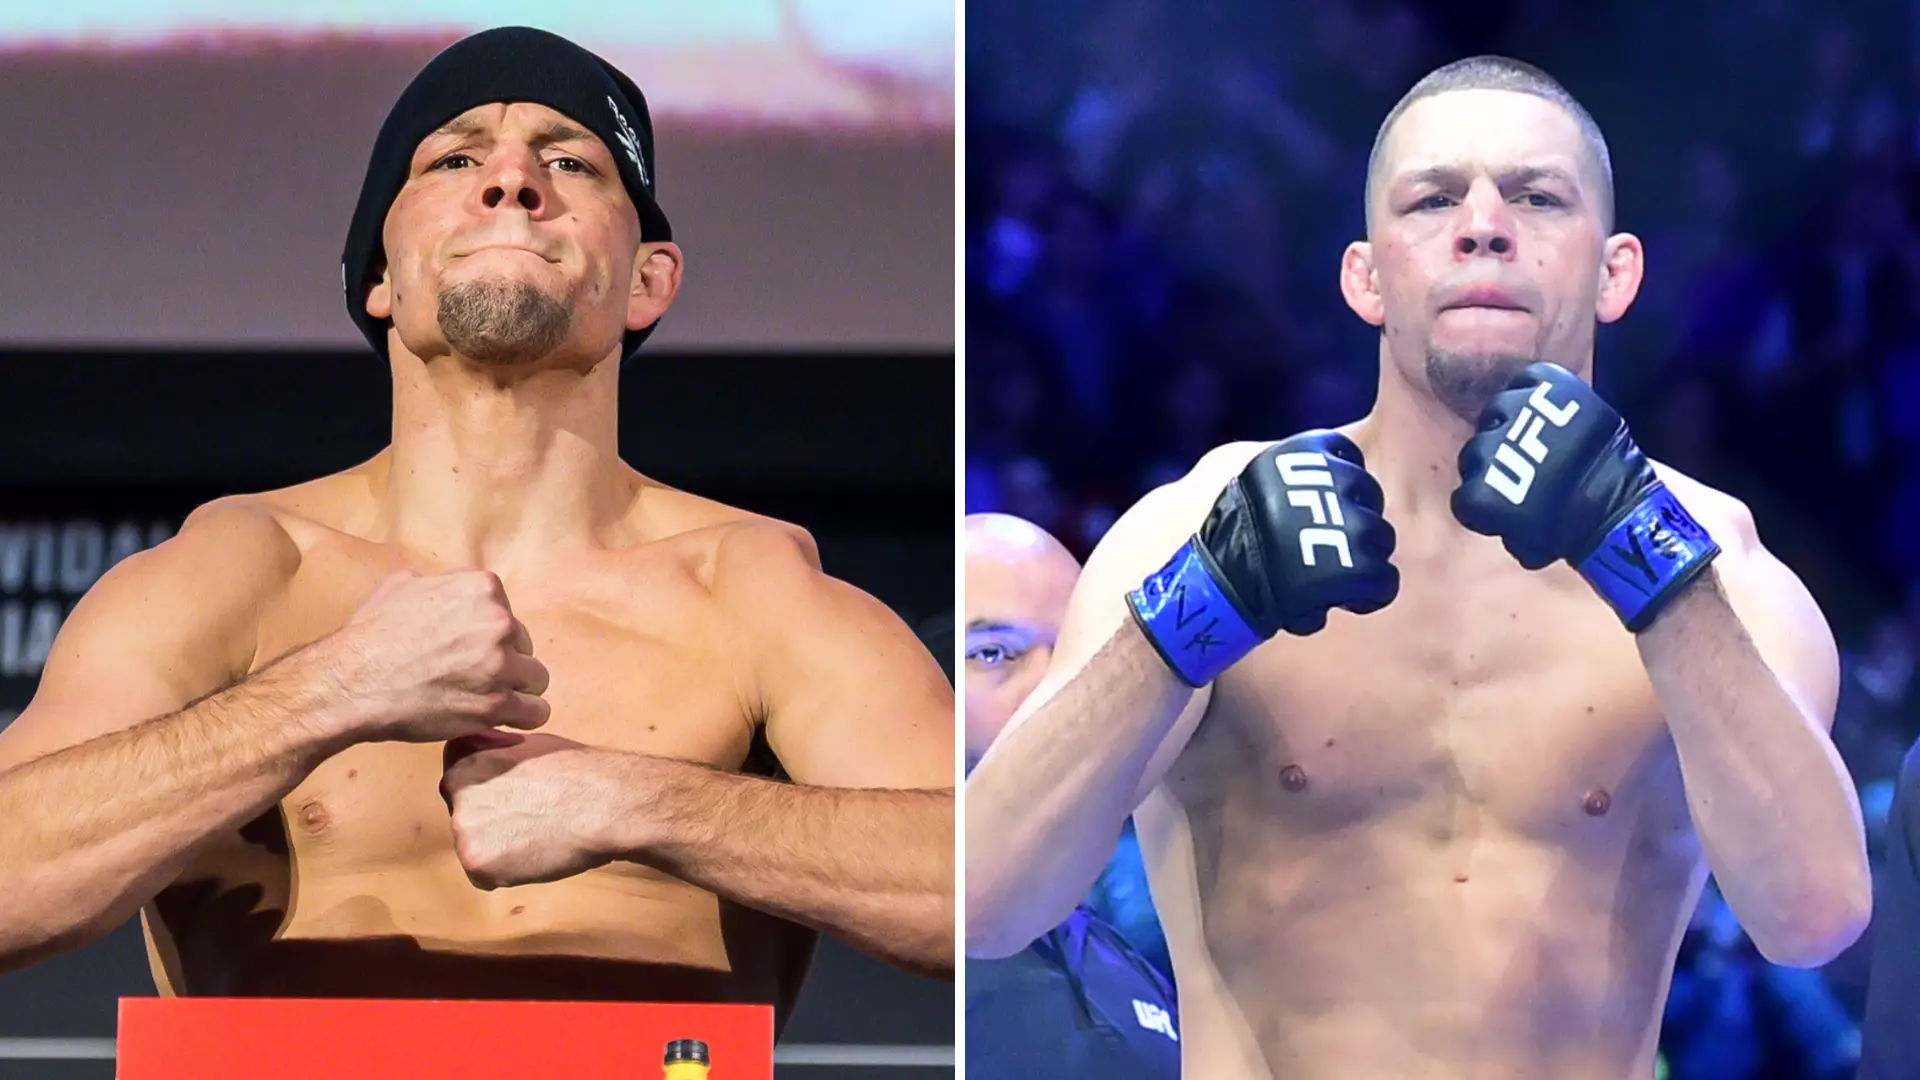 MMA Star Nate Diaz’s UFC Career Earnings Have Been Revealed